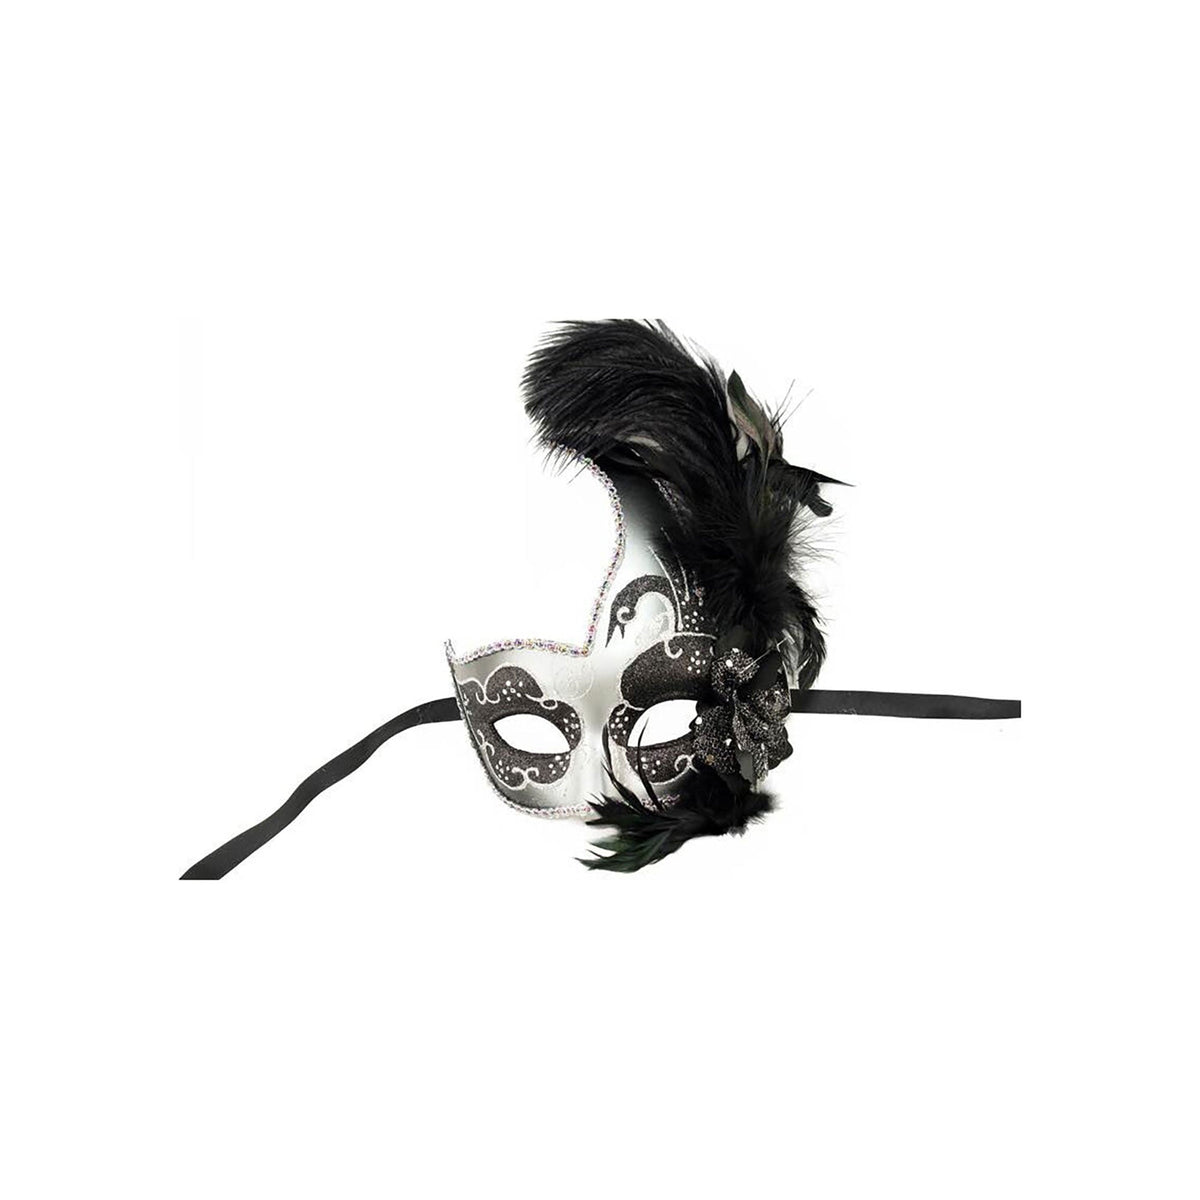 KBW GLOBAL CORP Costume Accessories Venetian Mask with Side Ostrich Feather, Assortment, 1 Count 831687011603